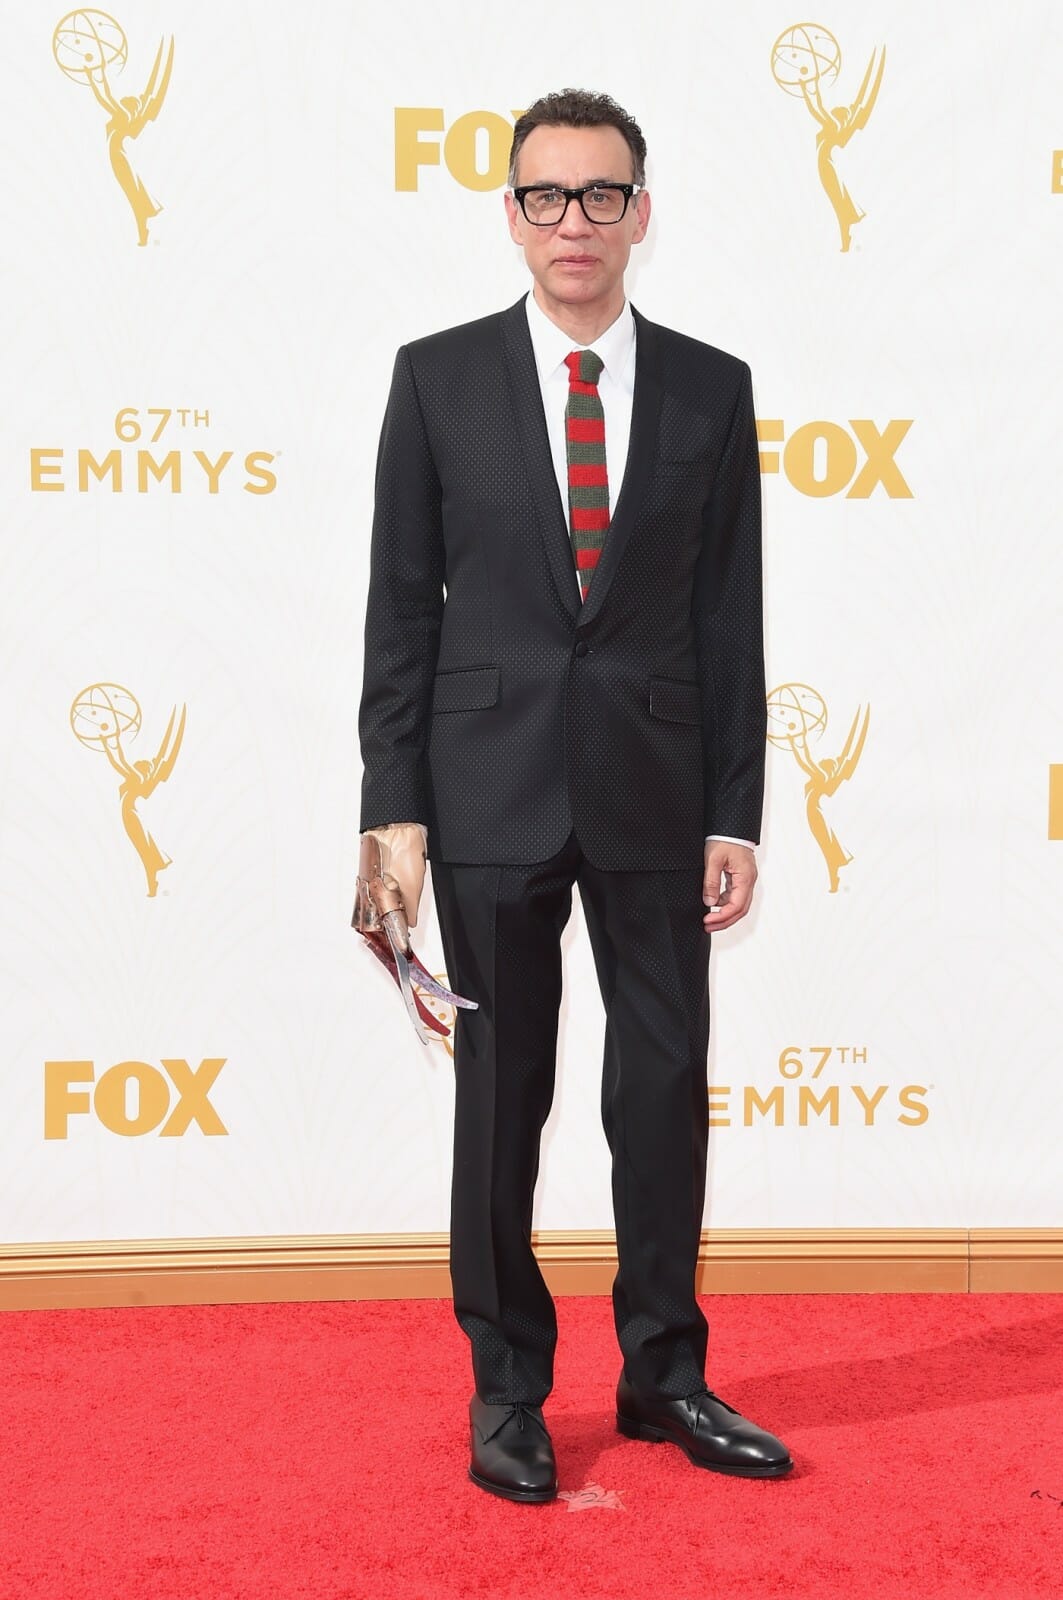 LOS ANGELES, CA - SEPTEMBER 20: Actor Fred Armisen attends the 67th Annual Primetime Emmy Awards at Microsoft Theater on September 20, 2015 in Los Angeles, California. (Photo by Jason Merritt/Getty Images)